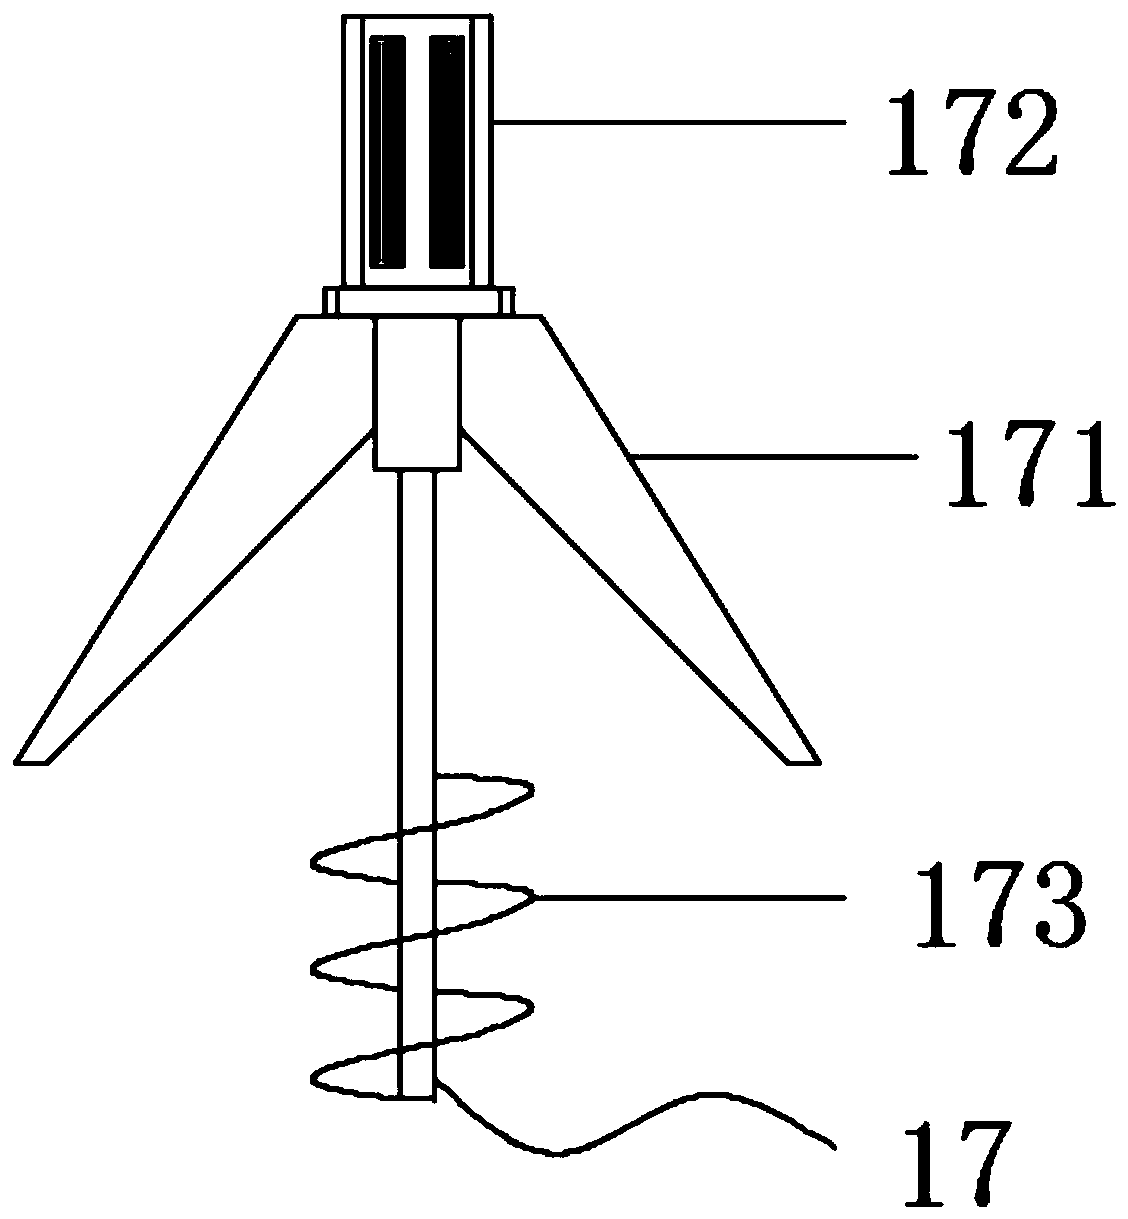 Building paint spraying device with purification function